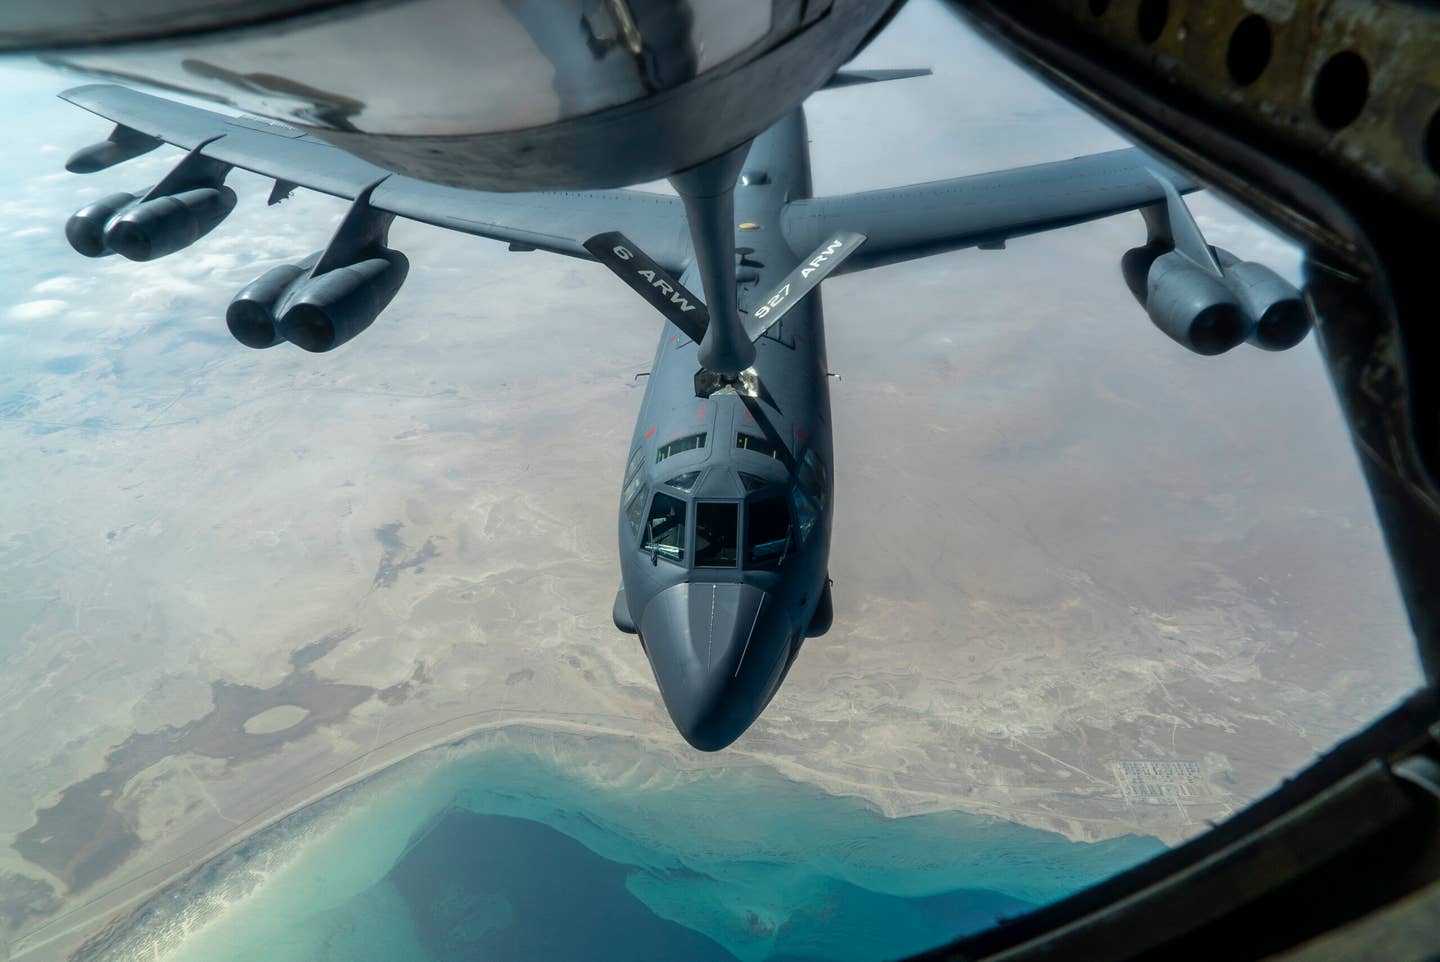 A U.S. Air Force B-52H “Stratofortress” from Minot Air Force Base, N.D., is refueled by a KC-135 “Stratotanker” in the U.S. Central Command area of responsibility Wednesday, Dec. 30, 2020. (Senior Airman Roslyn Ward/U.S. Air Force via AP)